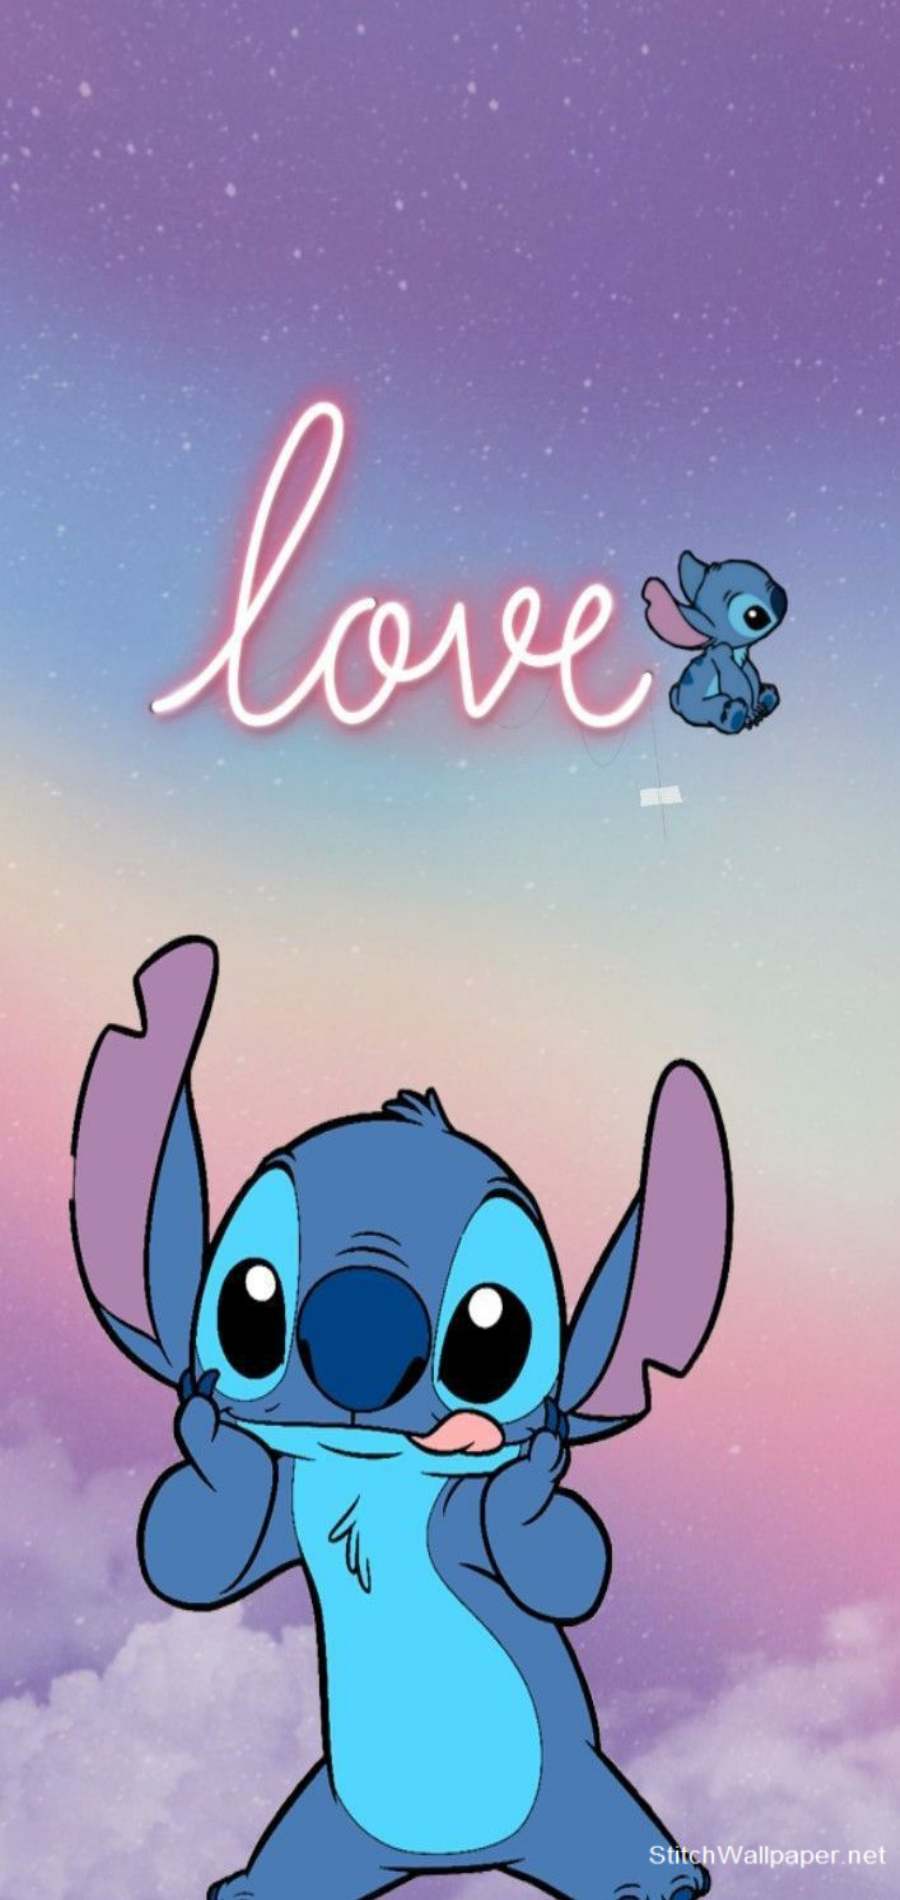 stitch wallpaper for your phone